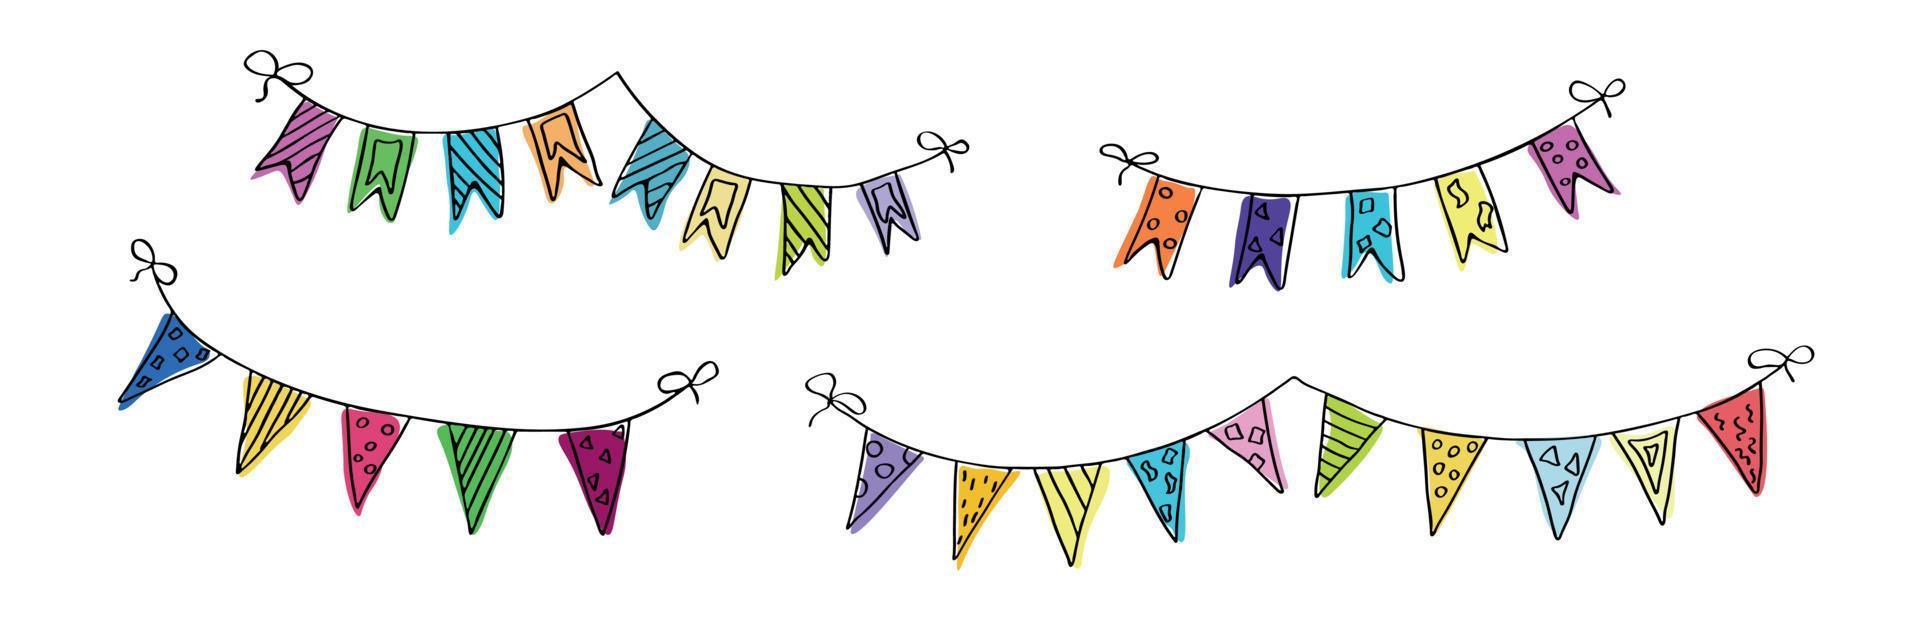 Vector hand drawn colorful garland. Cute doodle illustration. Celebration clipart for greeting cards, print, web, design, decor.